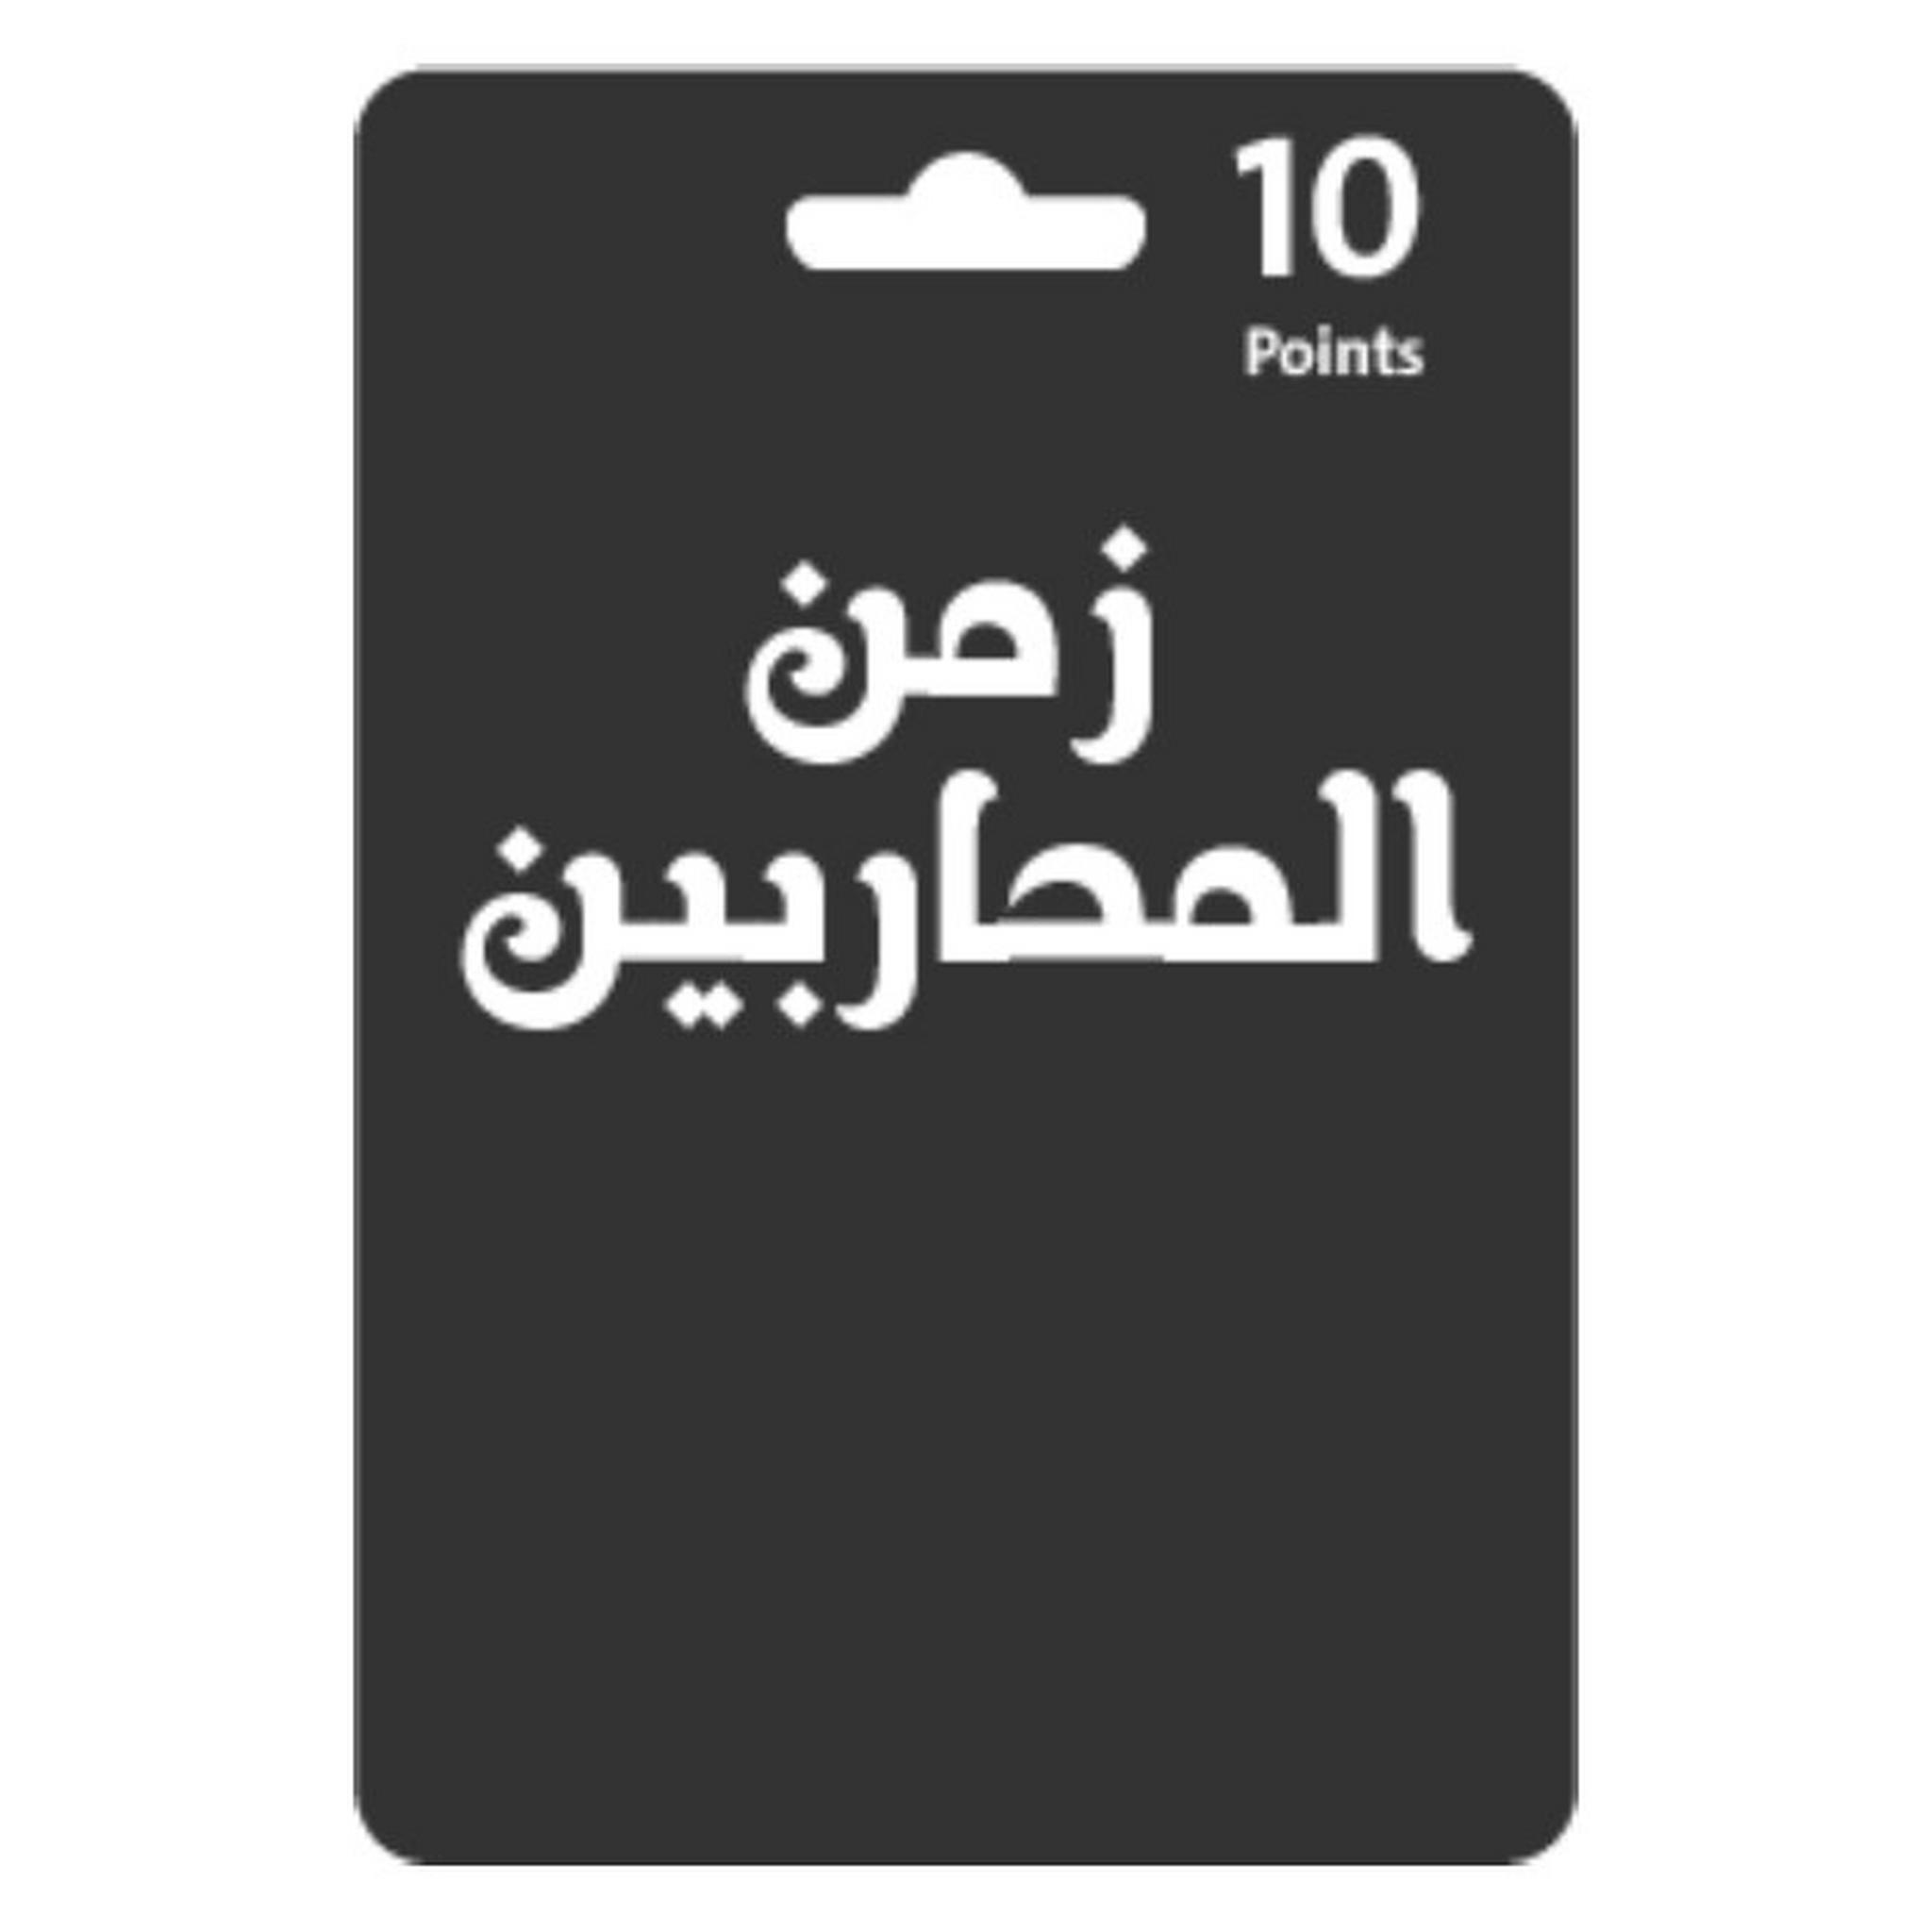 Zaman Almoharbeen 10 Points Card